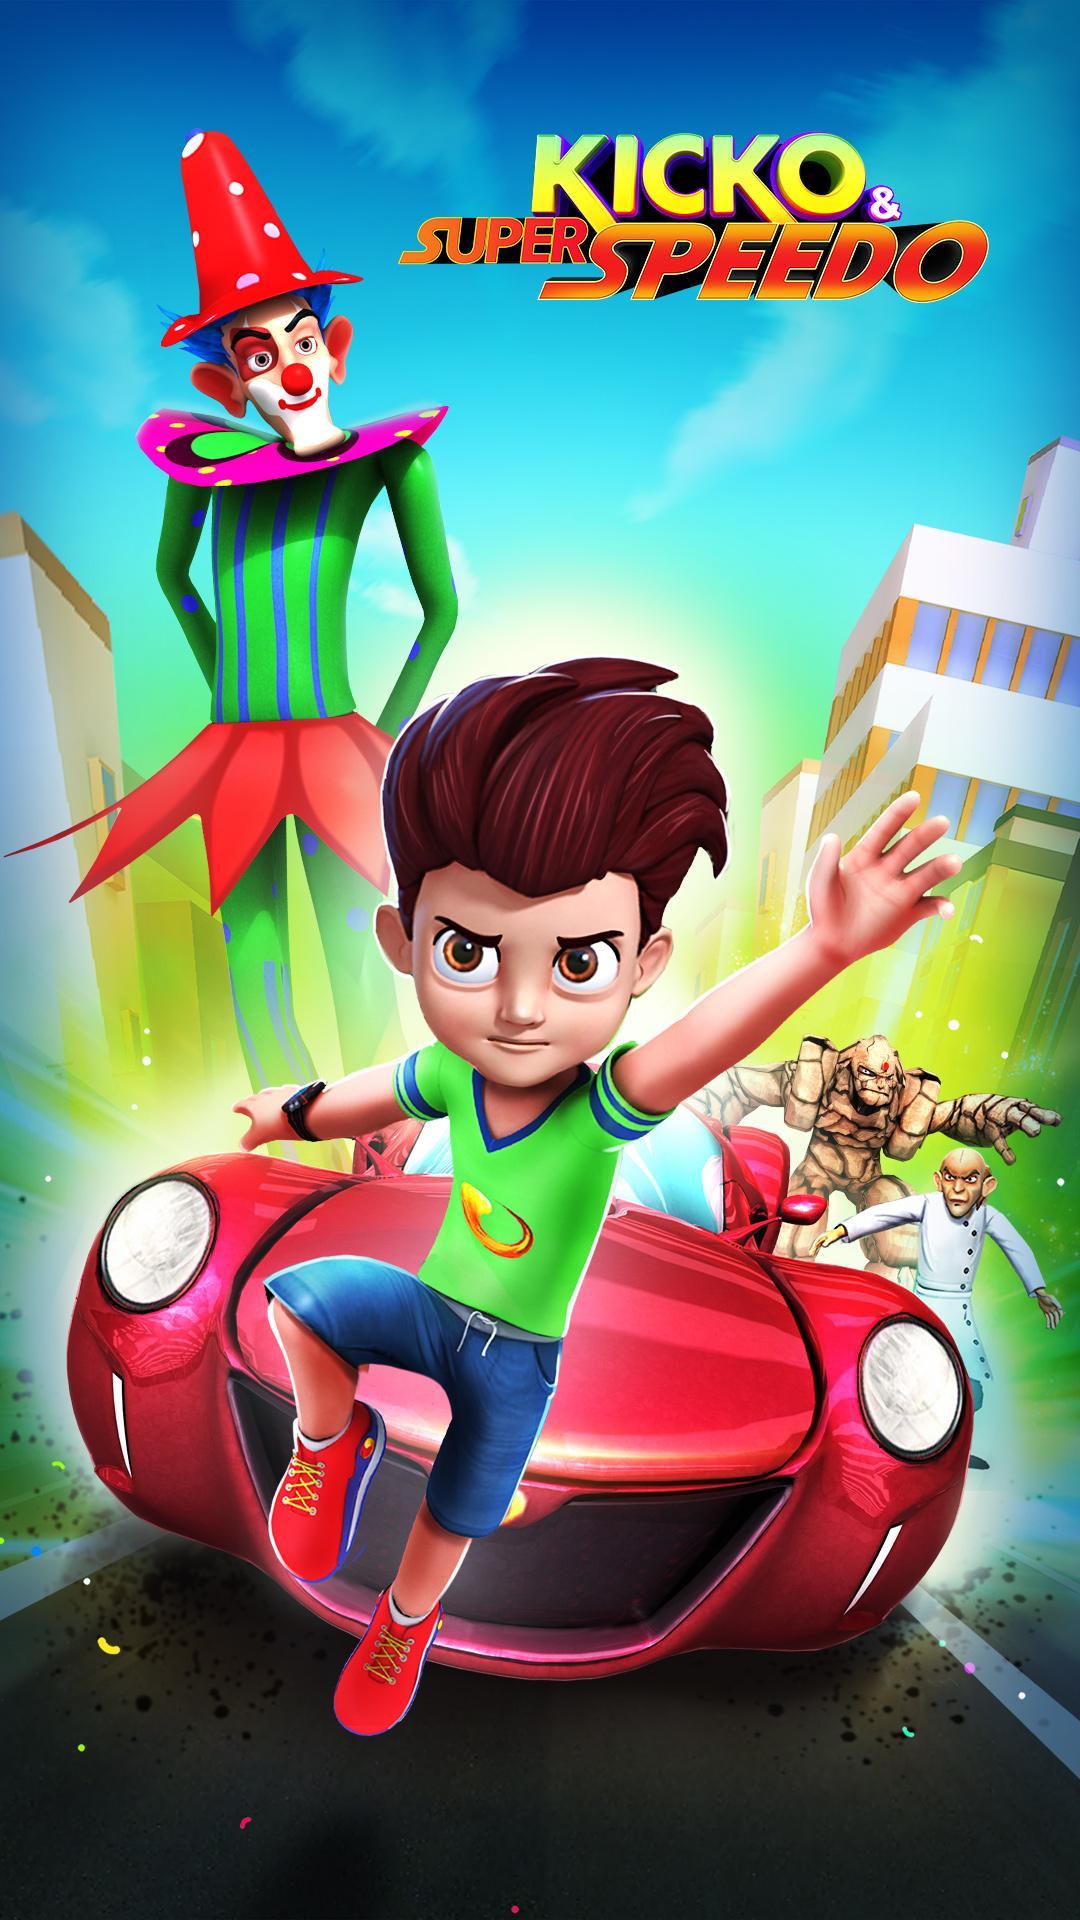 Kicko & Super Speedo for Android - APK Download